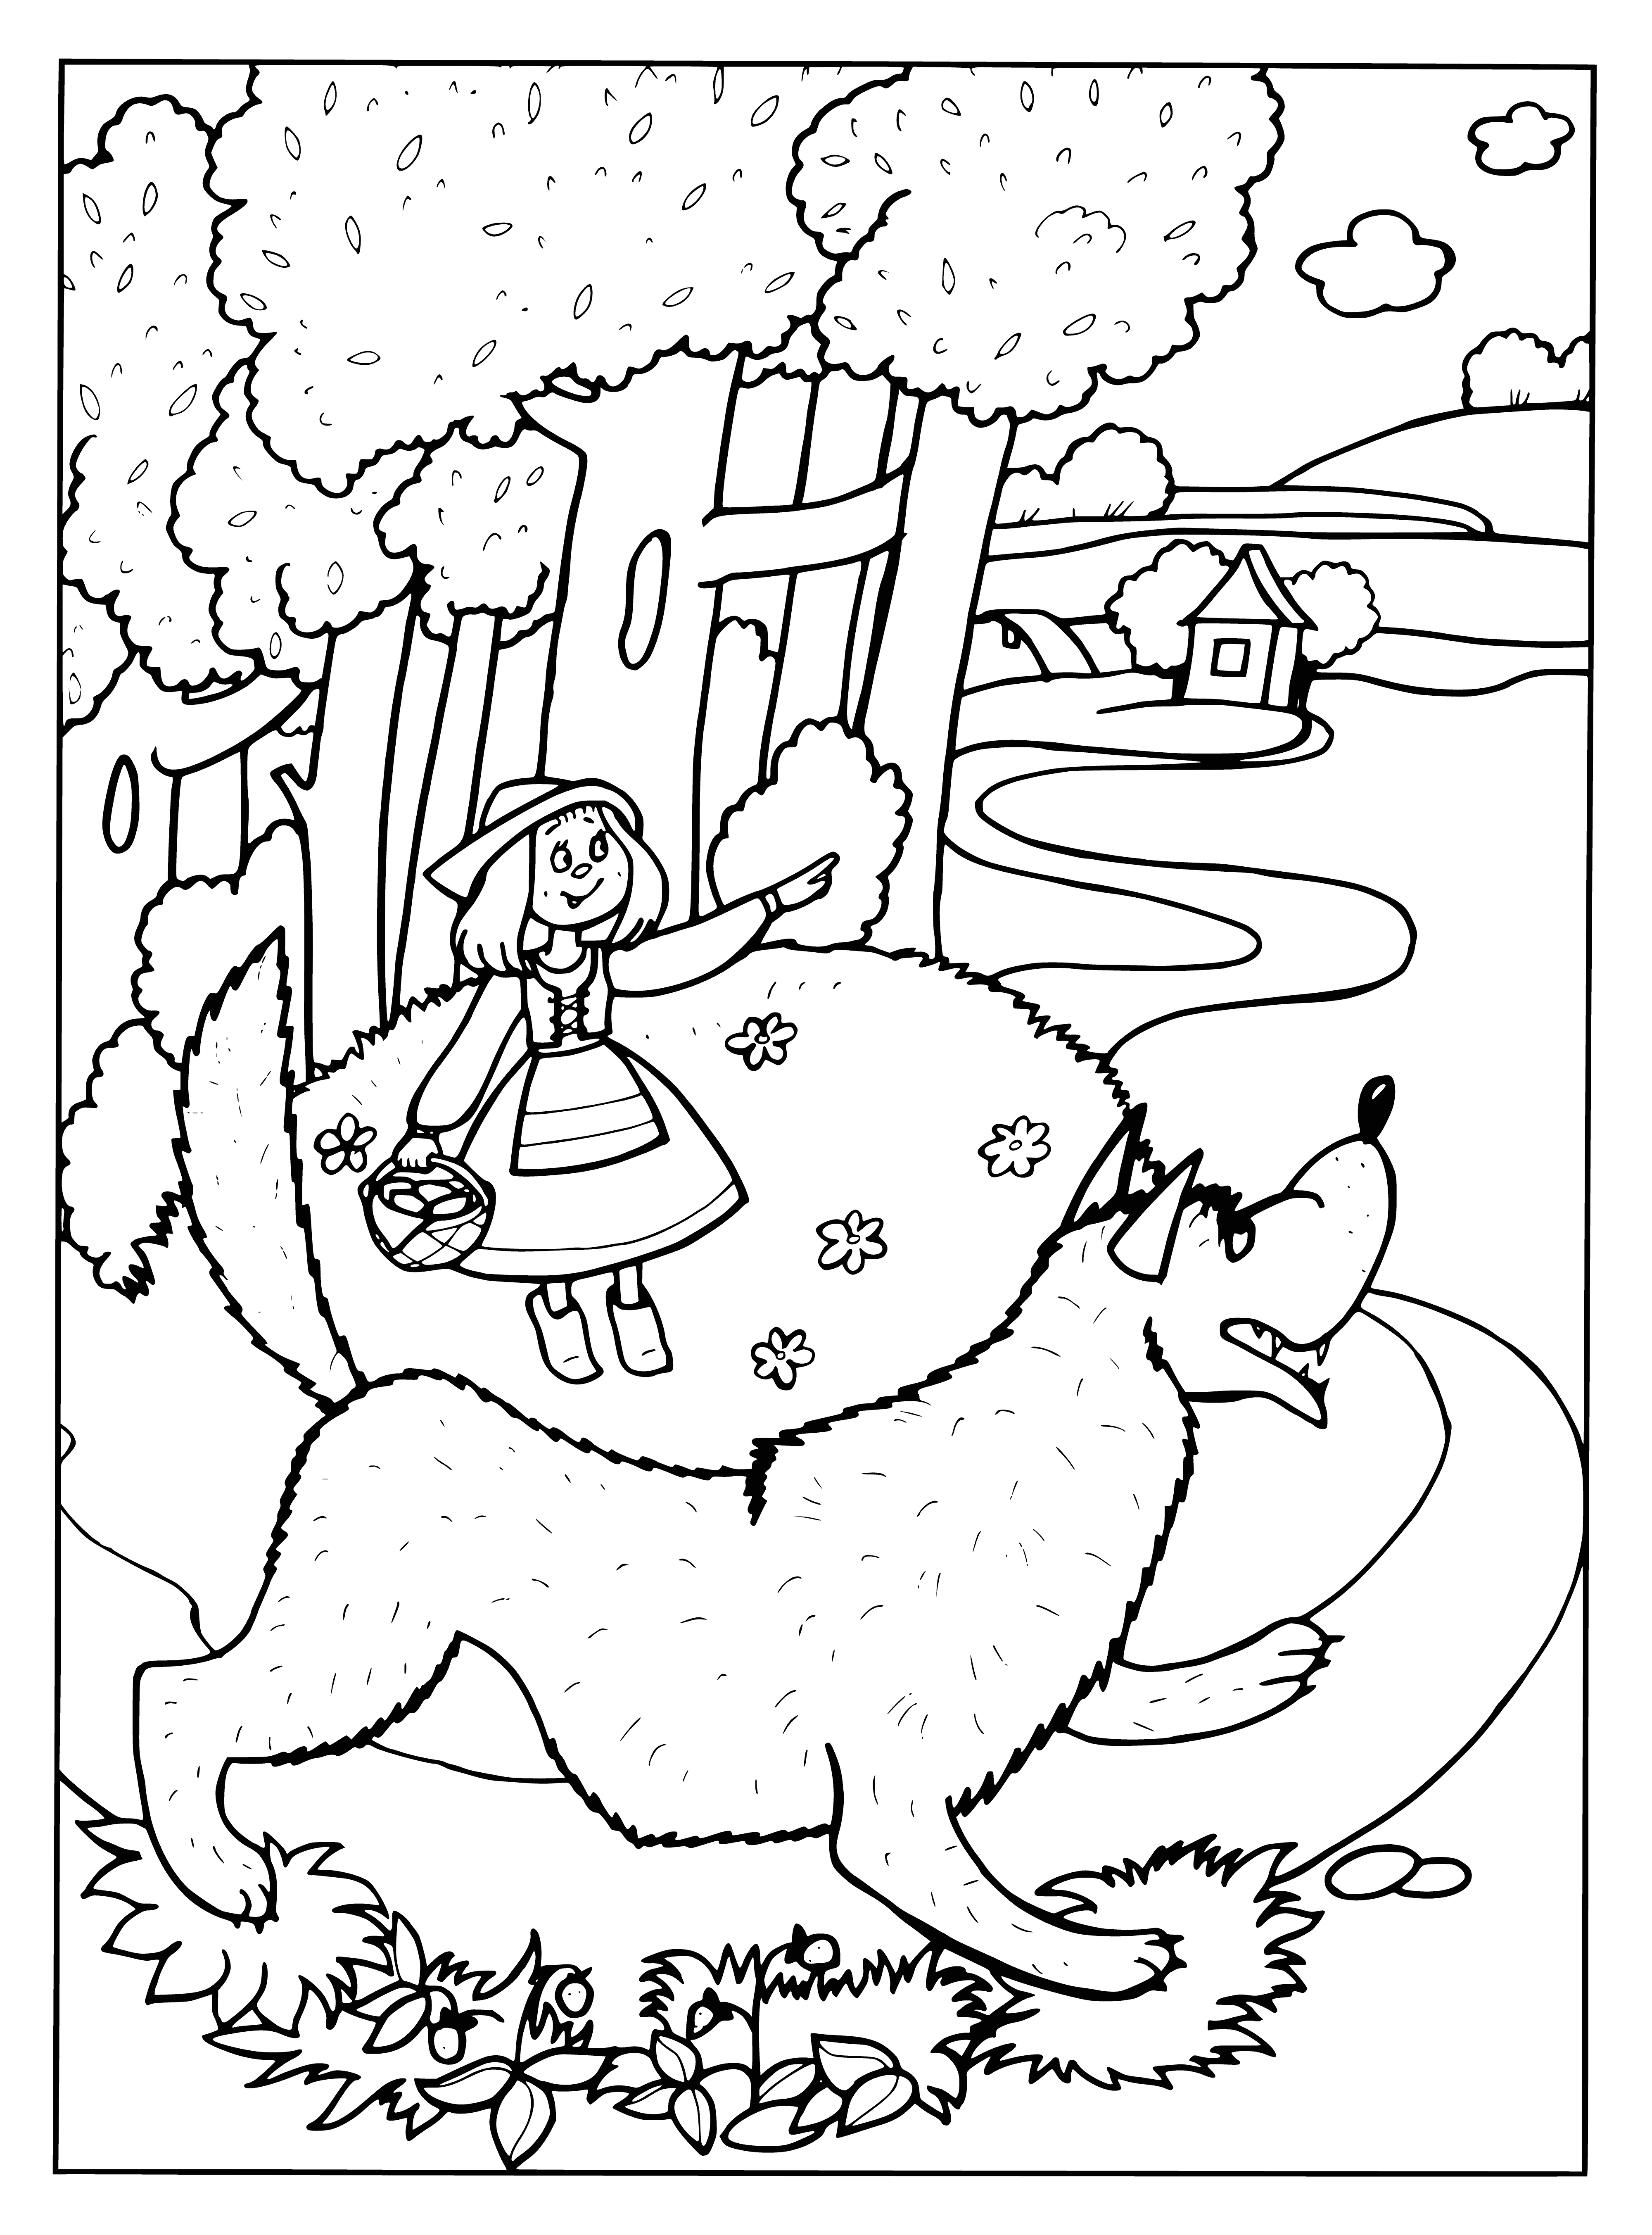 Wolf coloring page